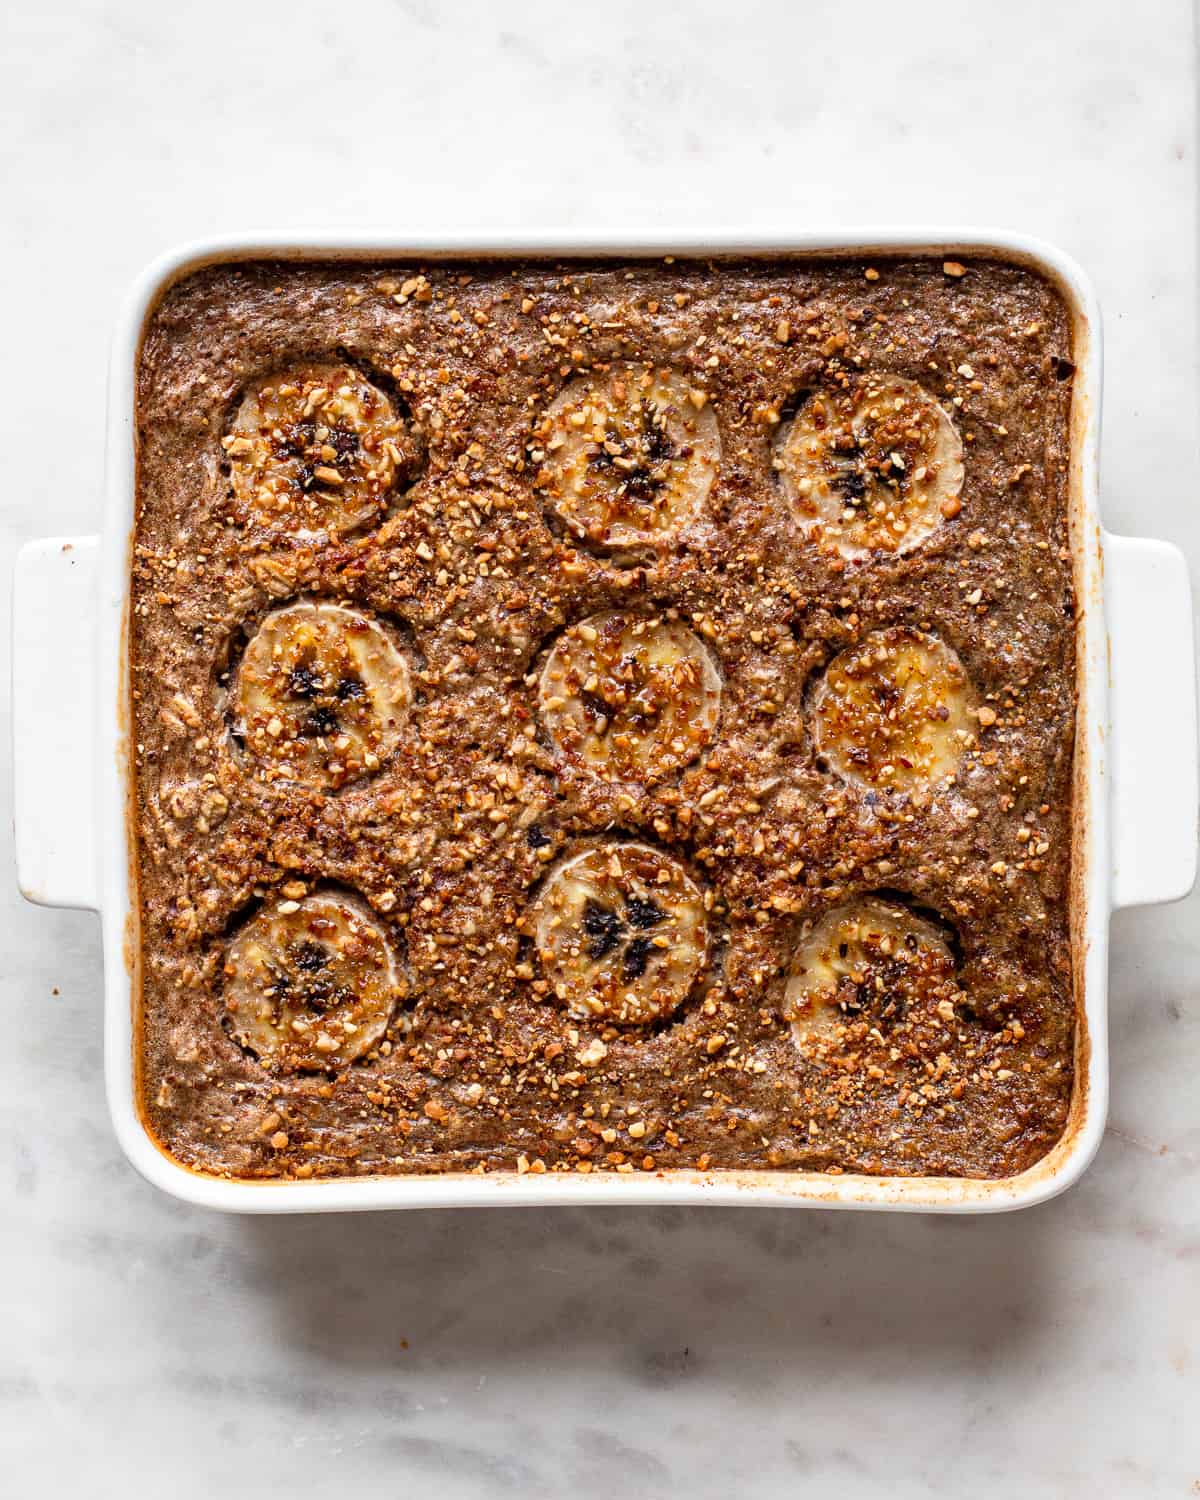 Baked oatmeal topped with banana slices.